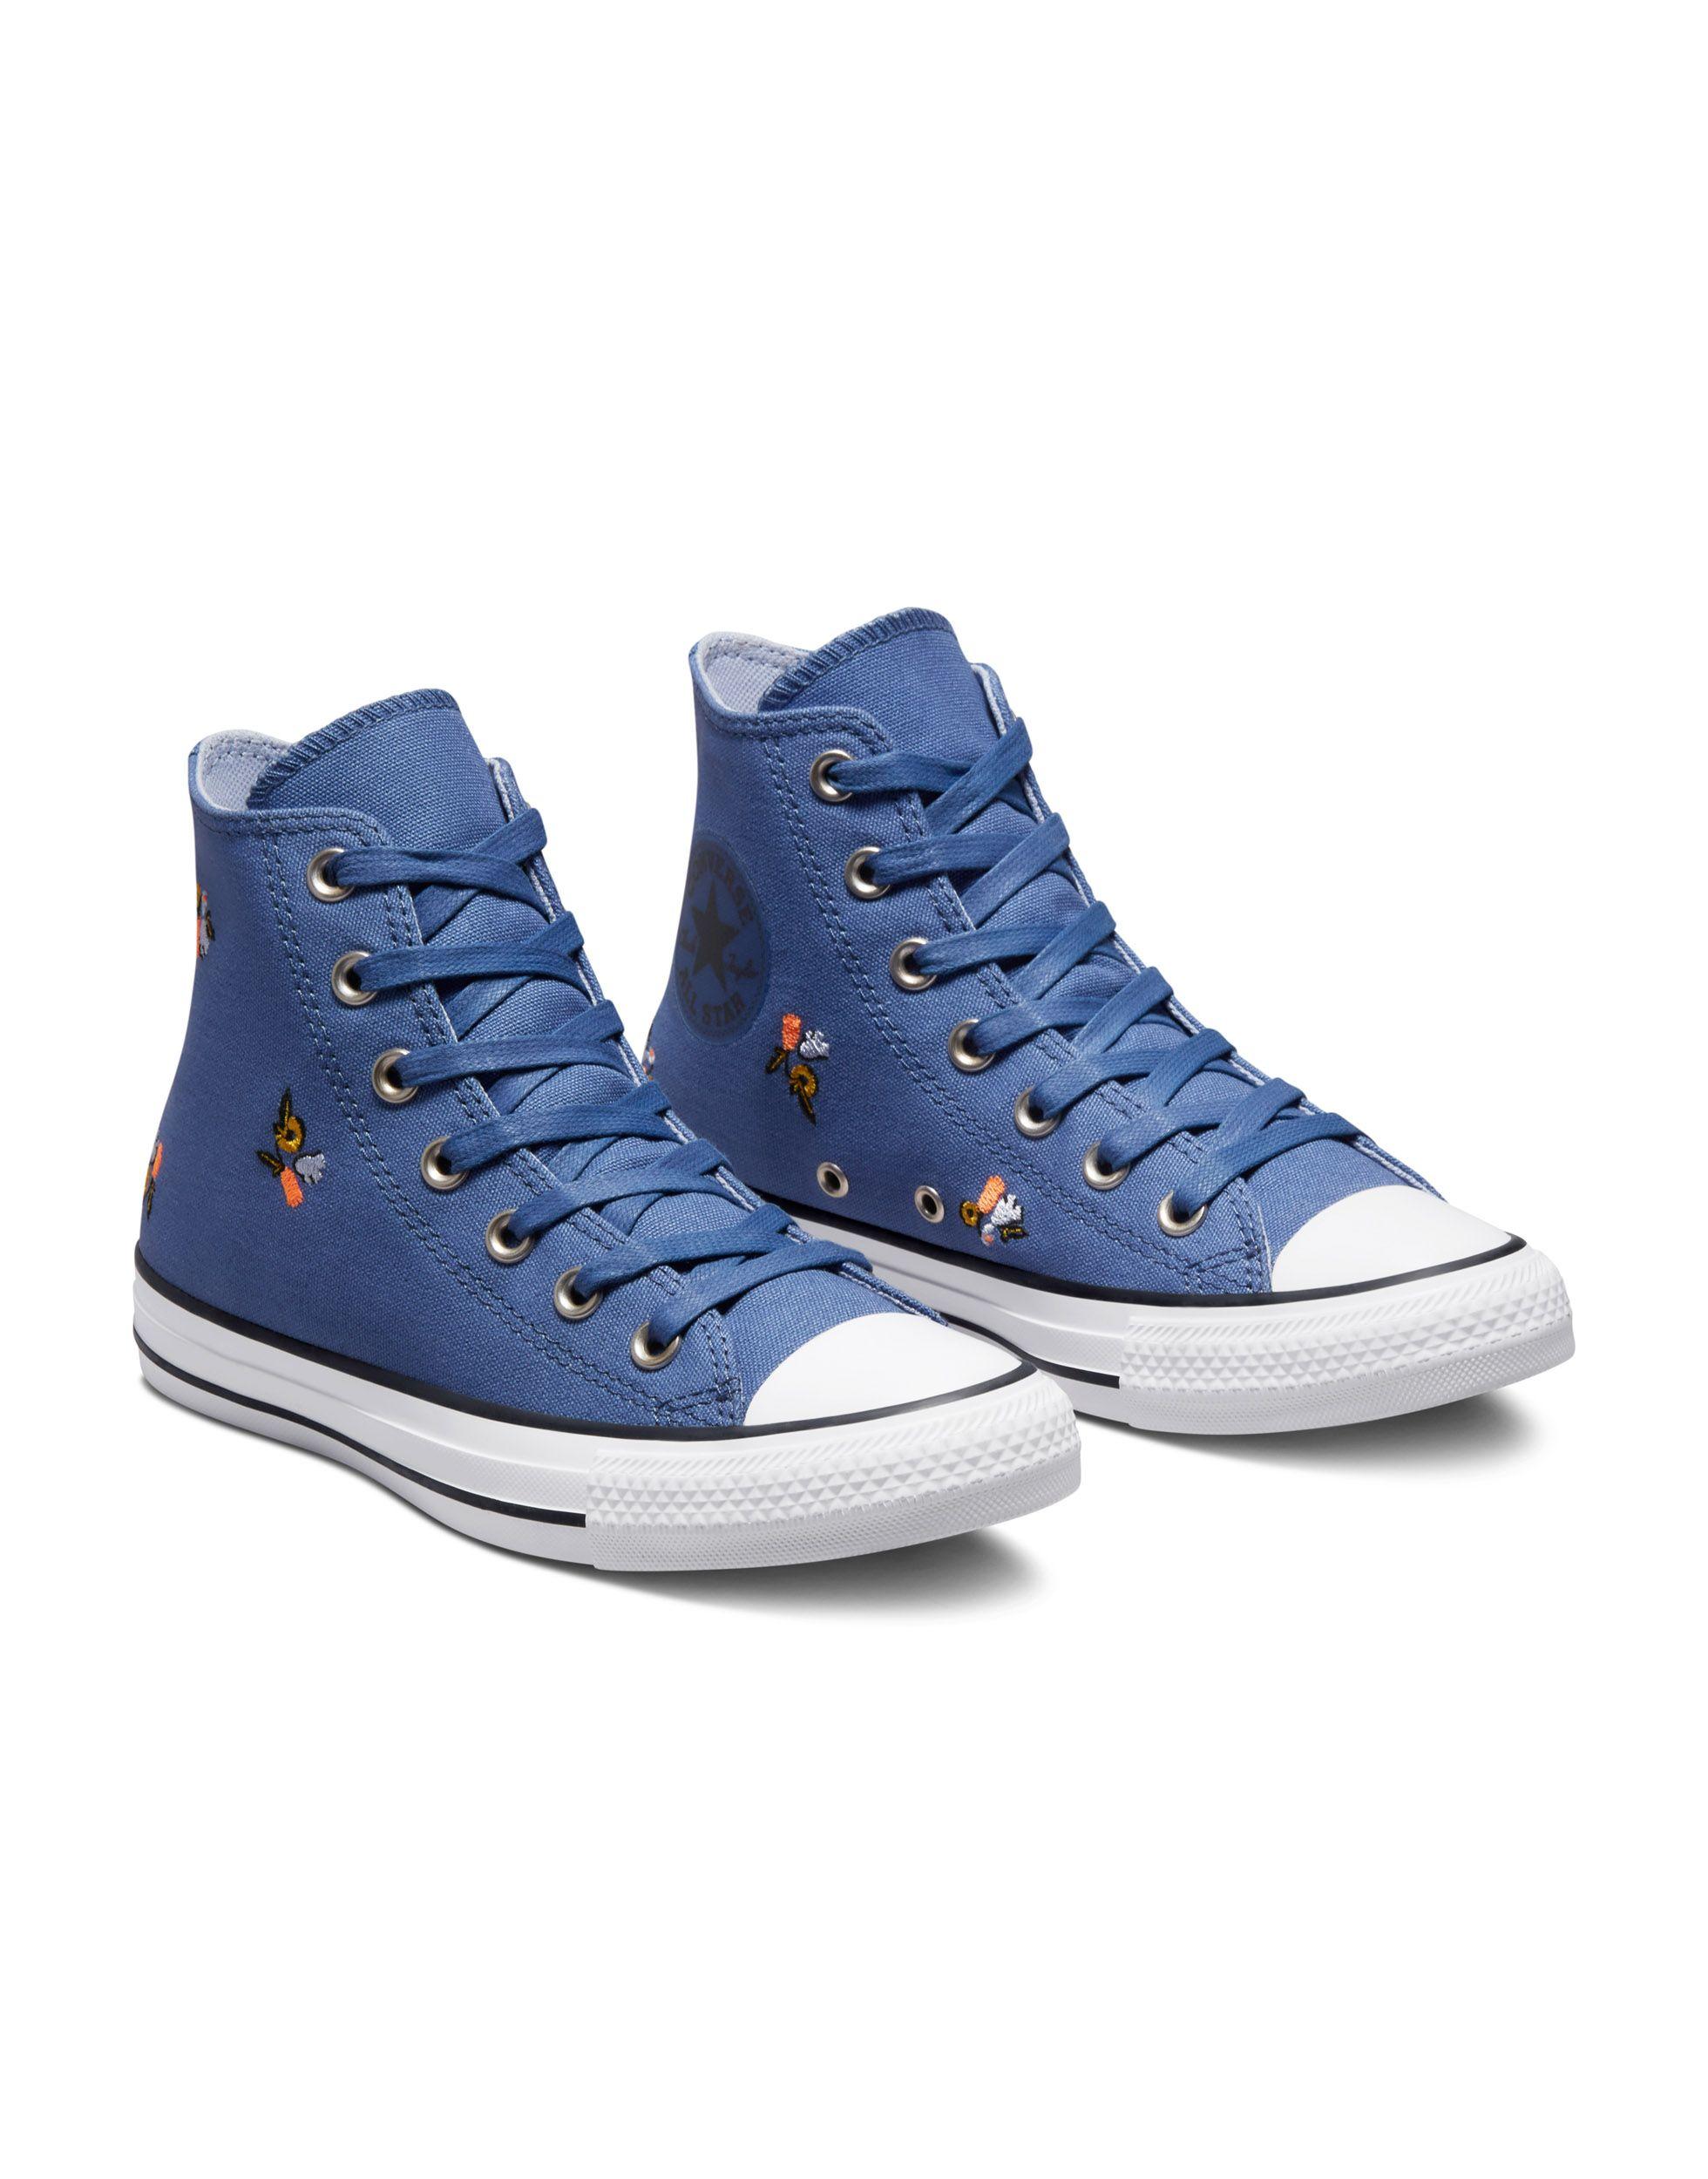 Converse Chuck Taylor All Hi Women's History Month Washed Canvas Sneakers Blue | Lyst